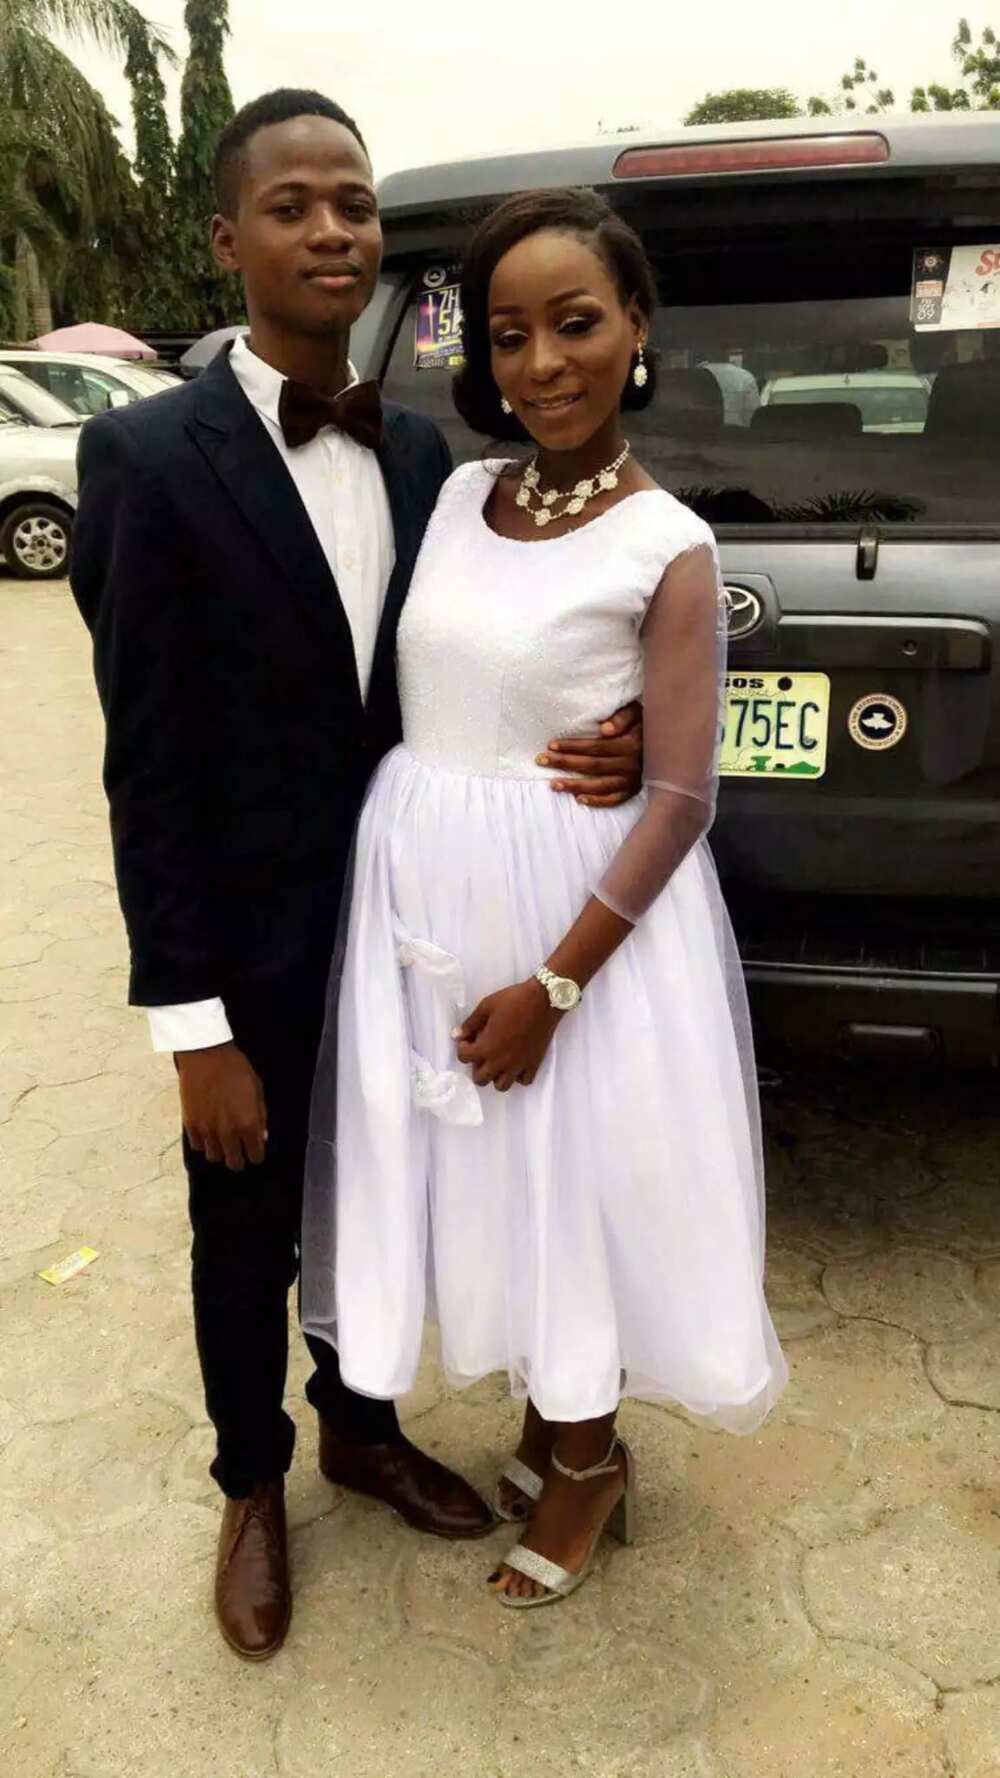 Young couple! 24 Year-old Nigerian Man marries 20 year-old woman in Lagos (photos)